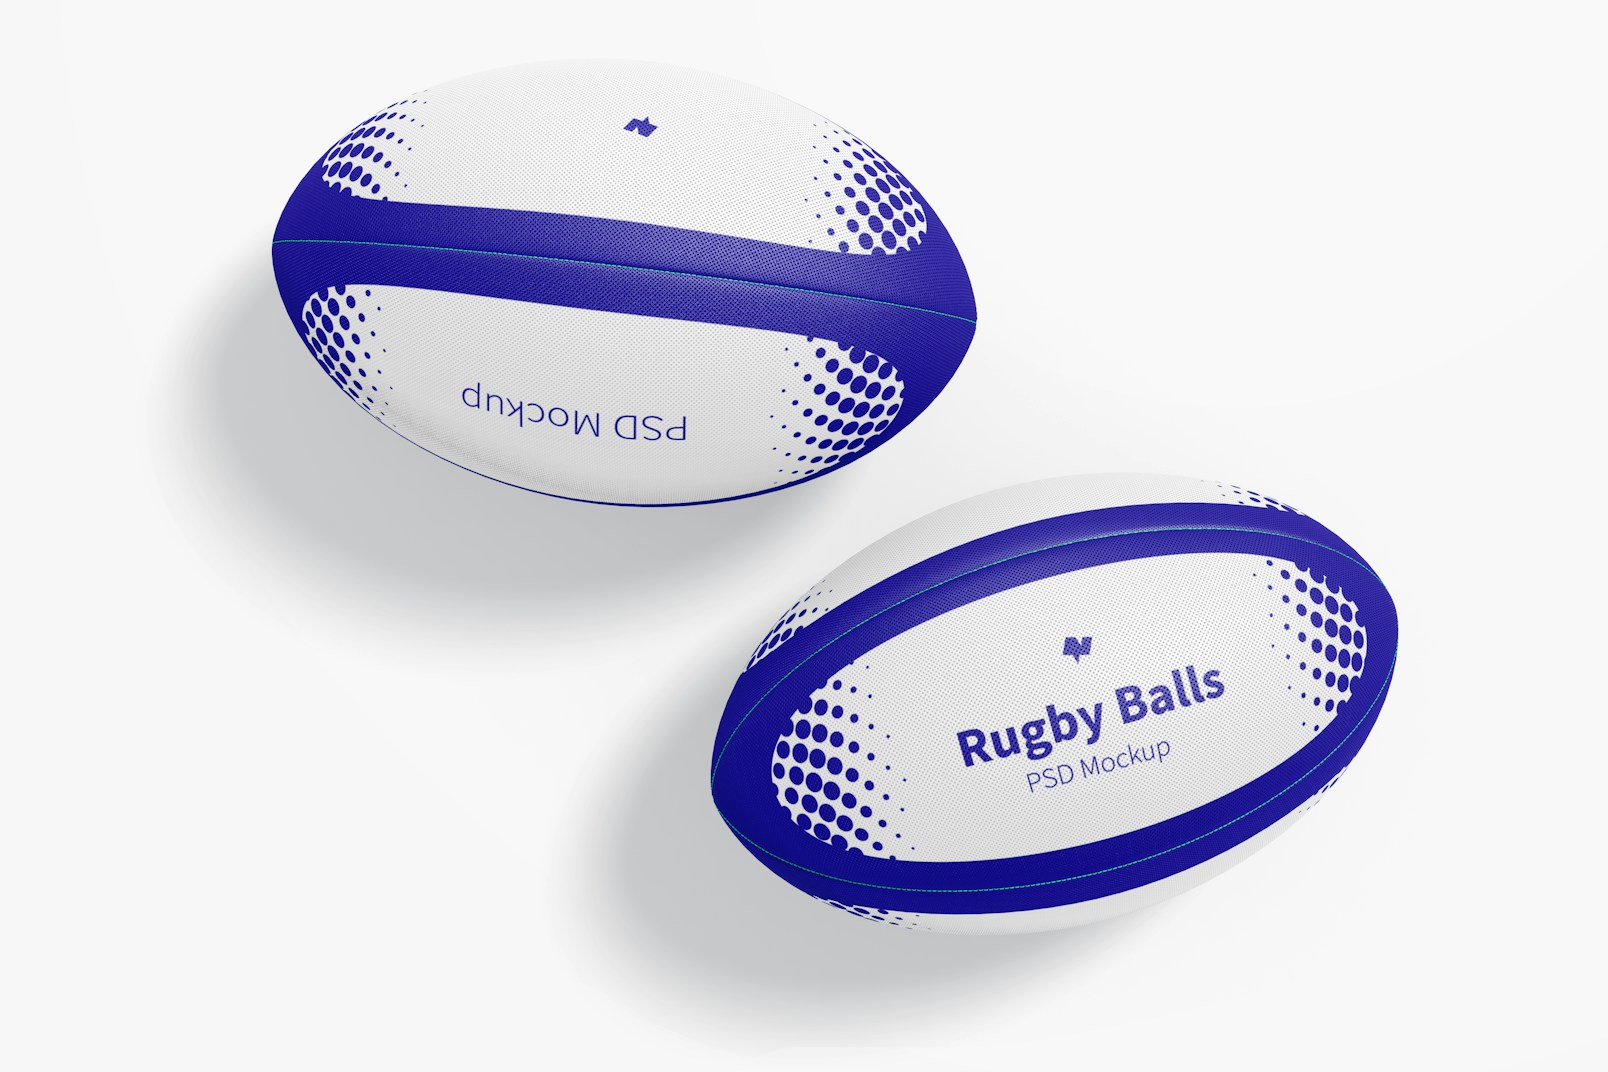 Rugby Balls Mockup, Top View